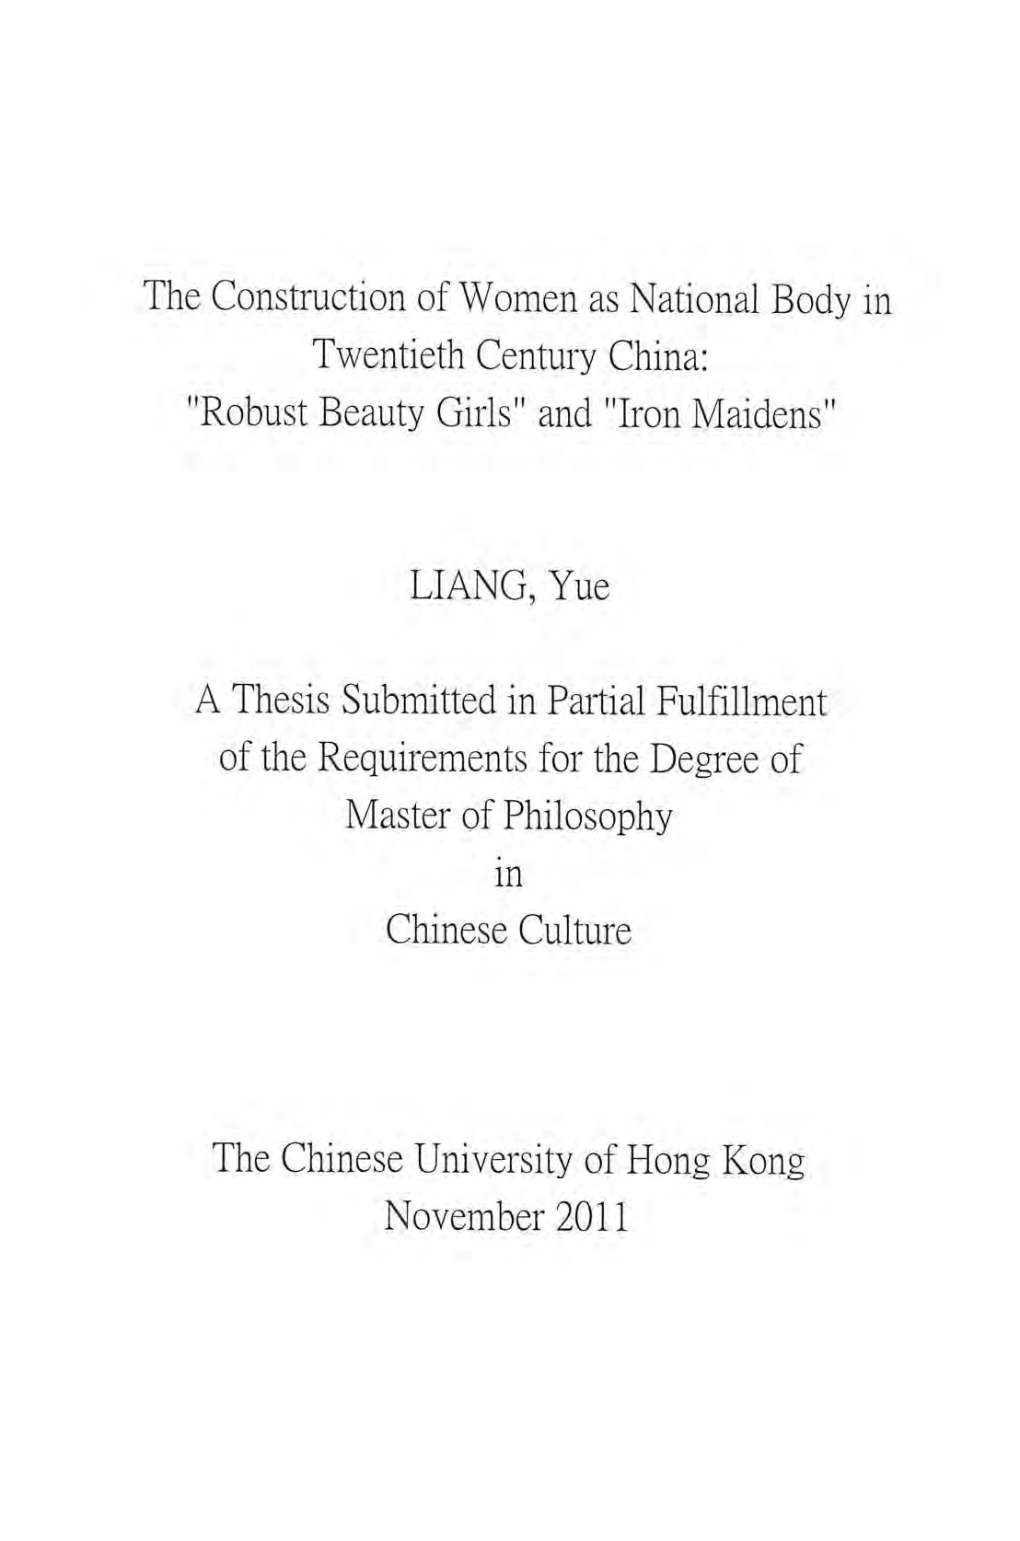 The Construction of Women As National Body in Twentieth Century China: "Robust Beauty Girls" and "Iron Maidens"